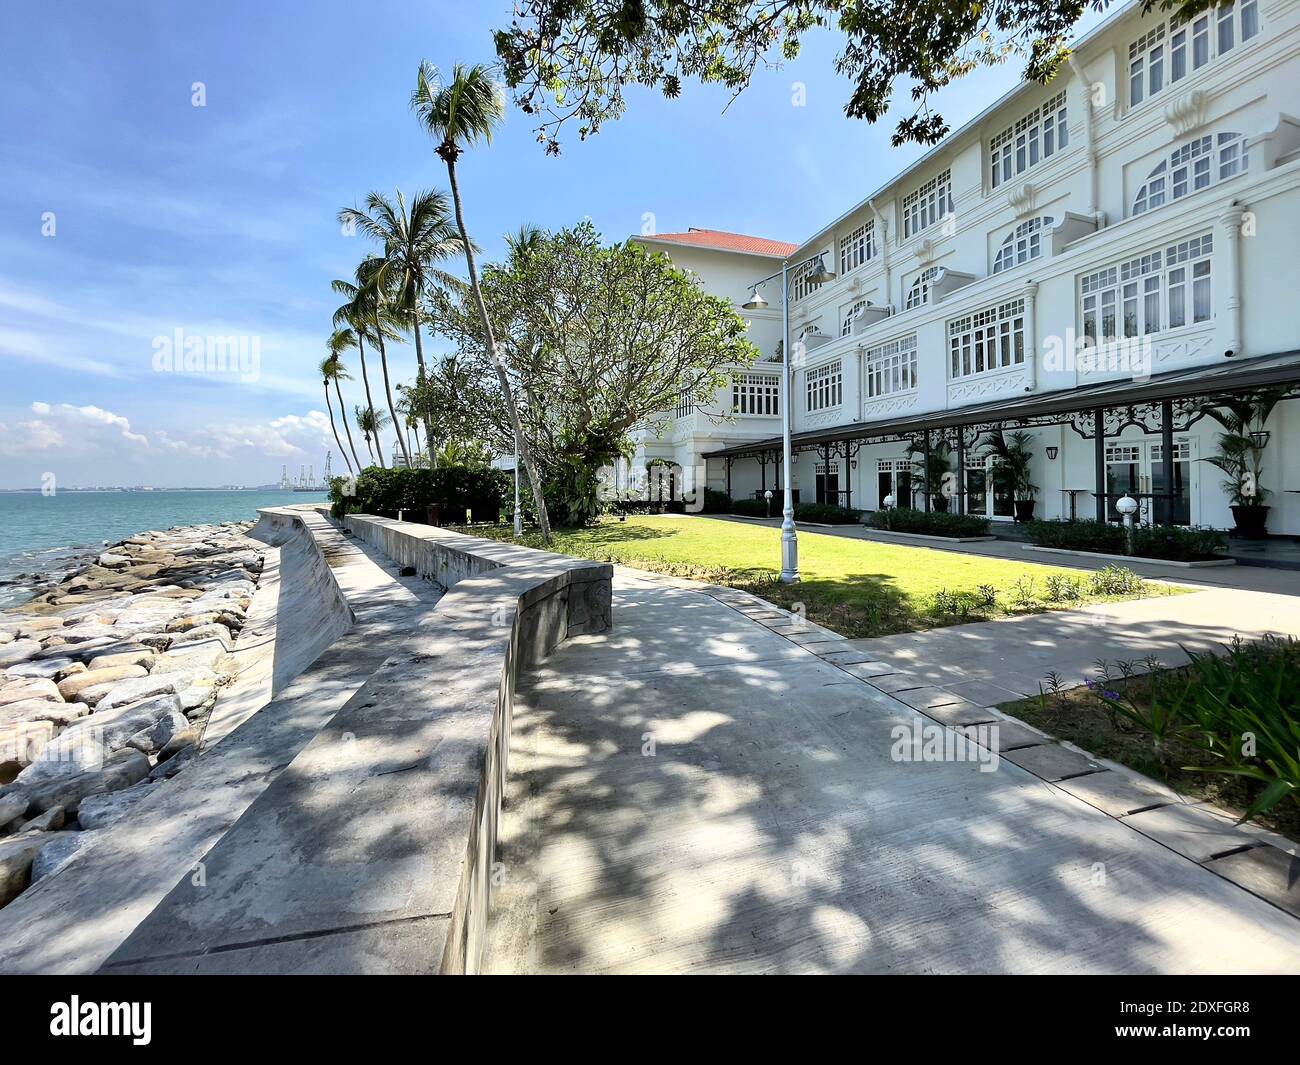 View of the historic Eastern & Oriental Hotel George Town, a landmark waterfront building in George Town, Penang, a UNESCO World Heritage site. Stock Photo